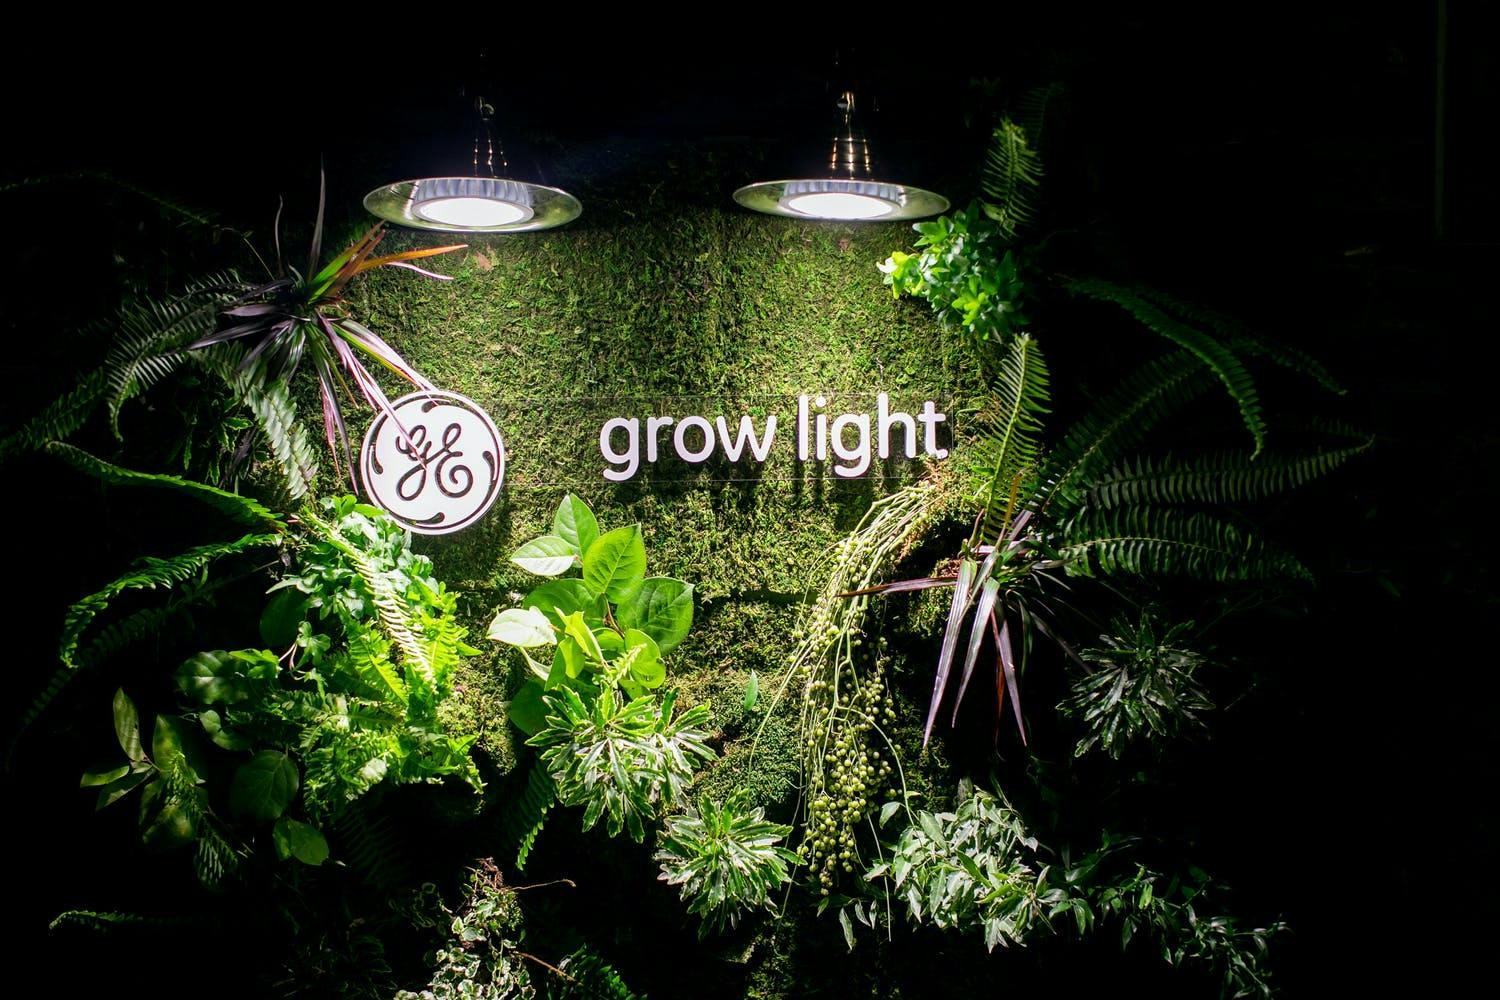 Boxwood backdrop with "grow light" signage, overhead lights, and a lush display of plants.